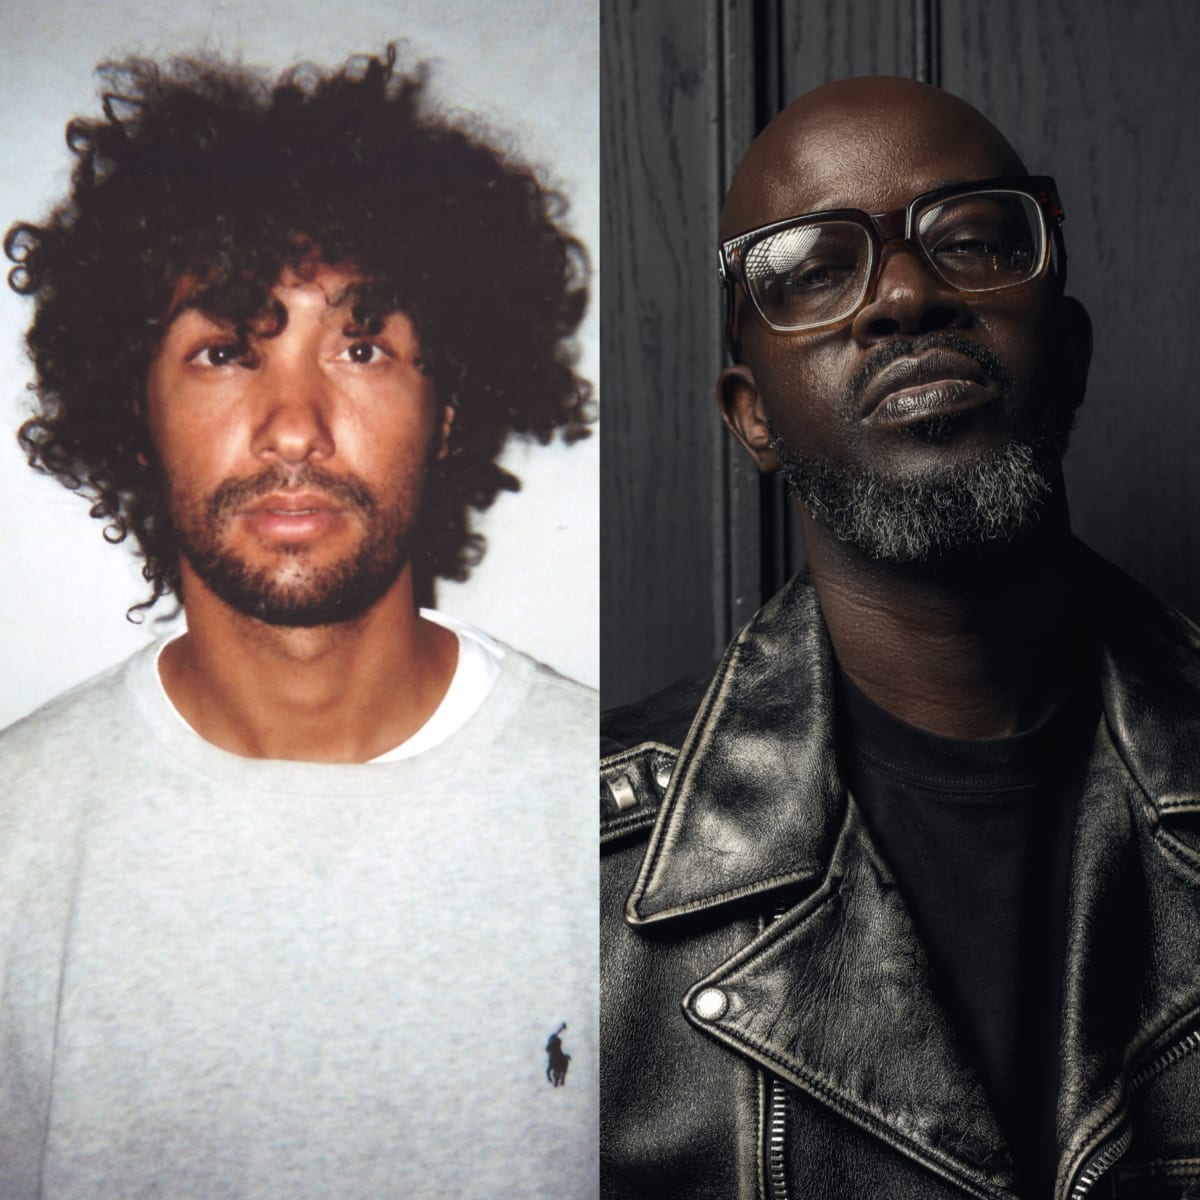 Listen: &ME Joins Forces With Black Coffee to Close Out Trilogy of “Rapture” Singles